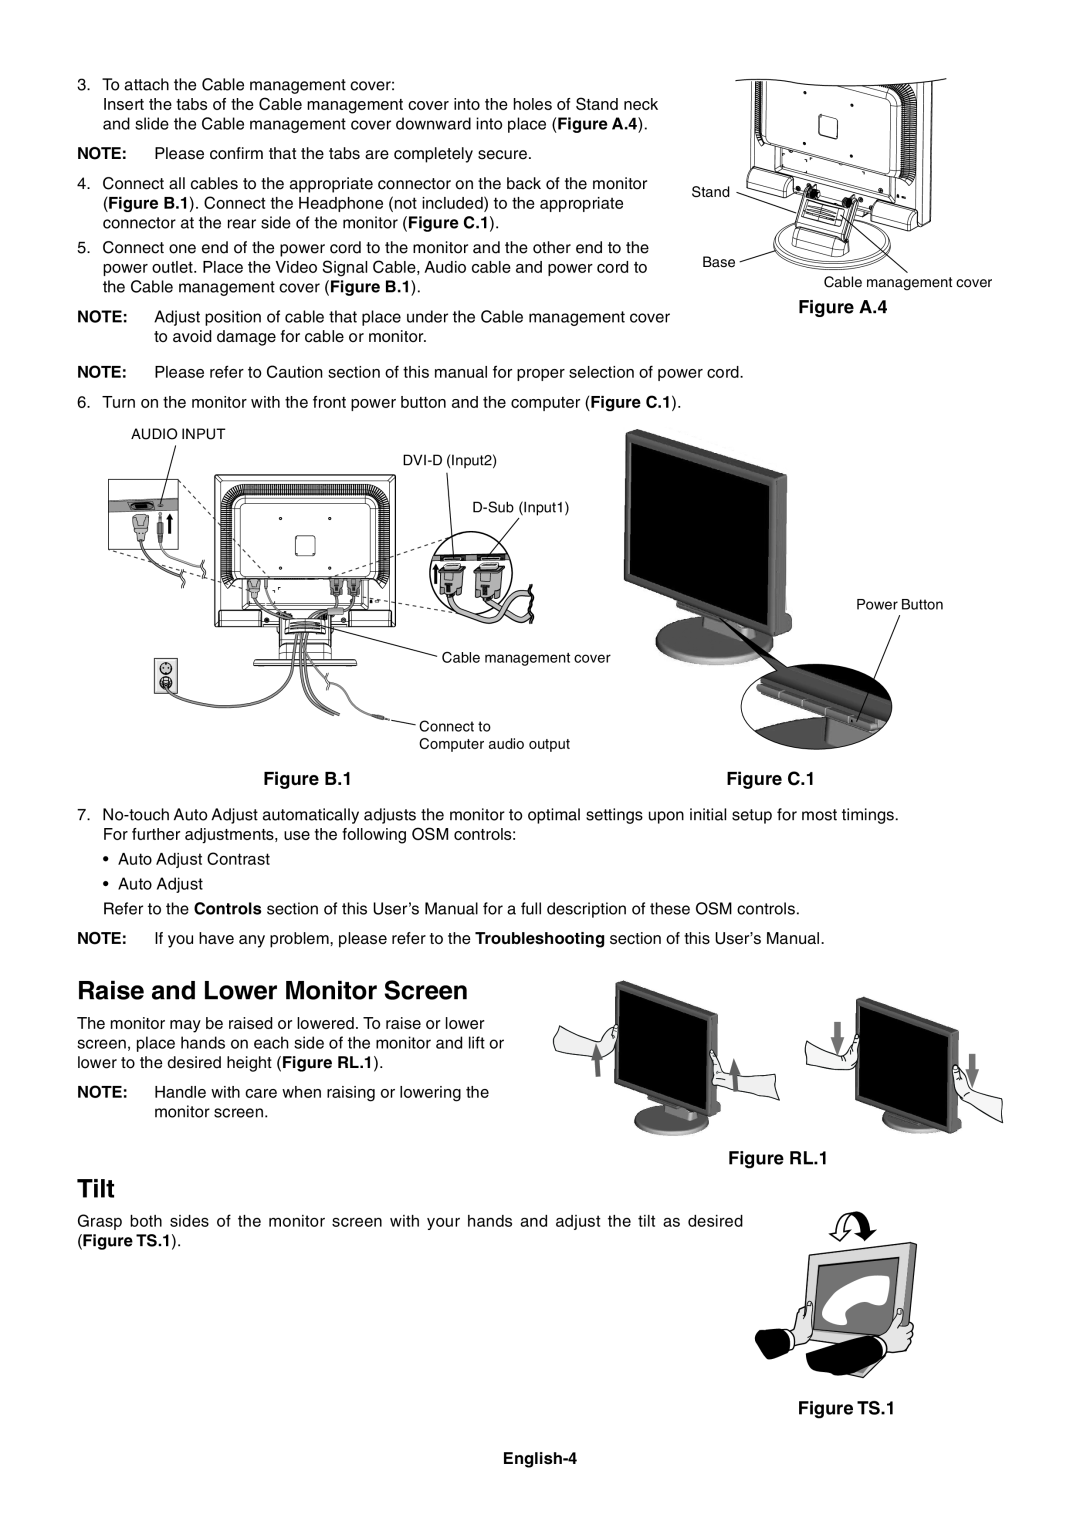 NEC LCD175VXM+ Raise and Lower Monitor Screen, Tilt, Figure A.4, Figure B.1, Figure C.1, Figure RL.1, Figure TS.1 